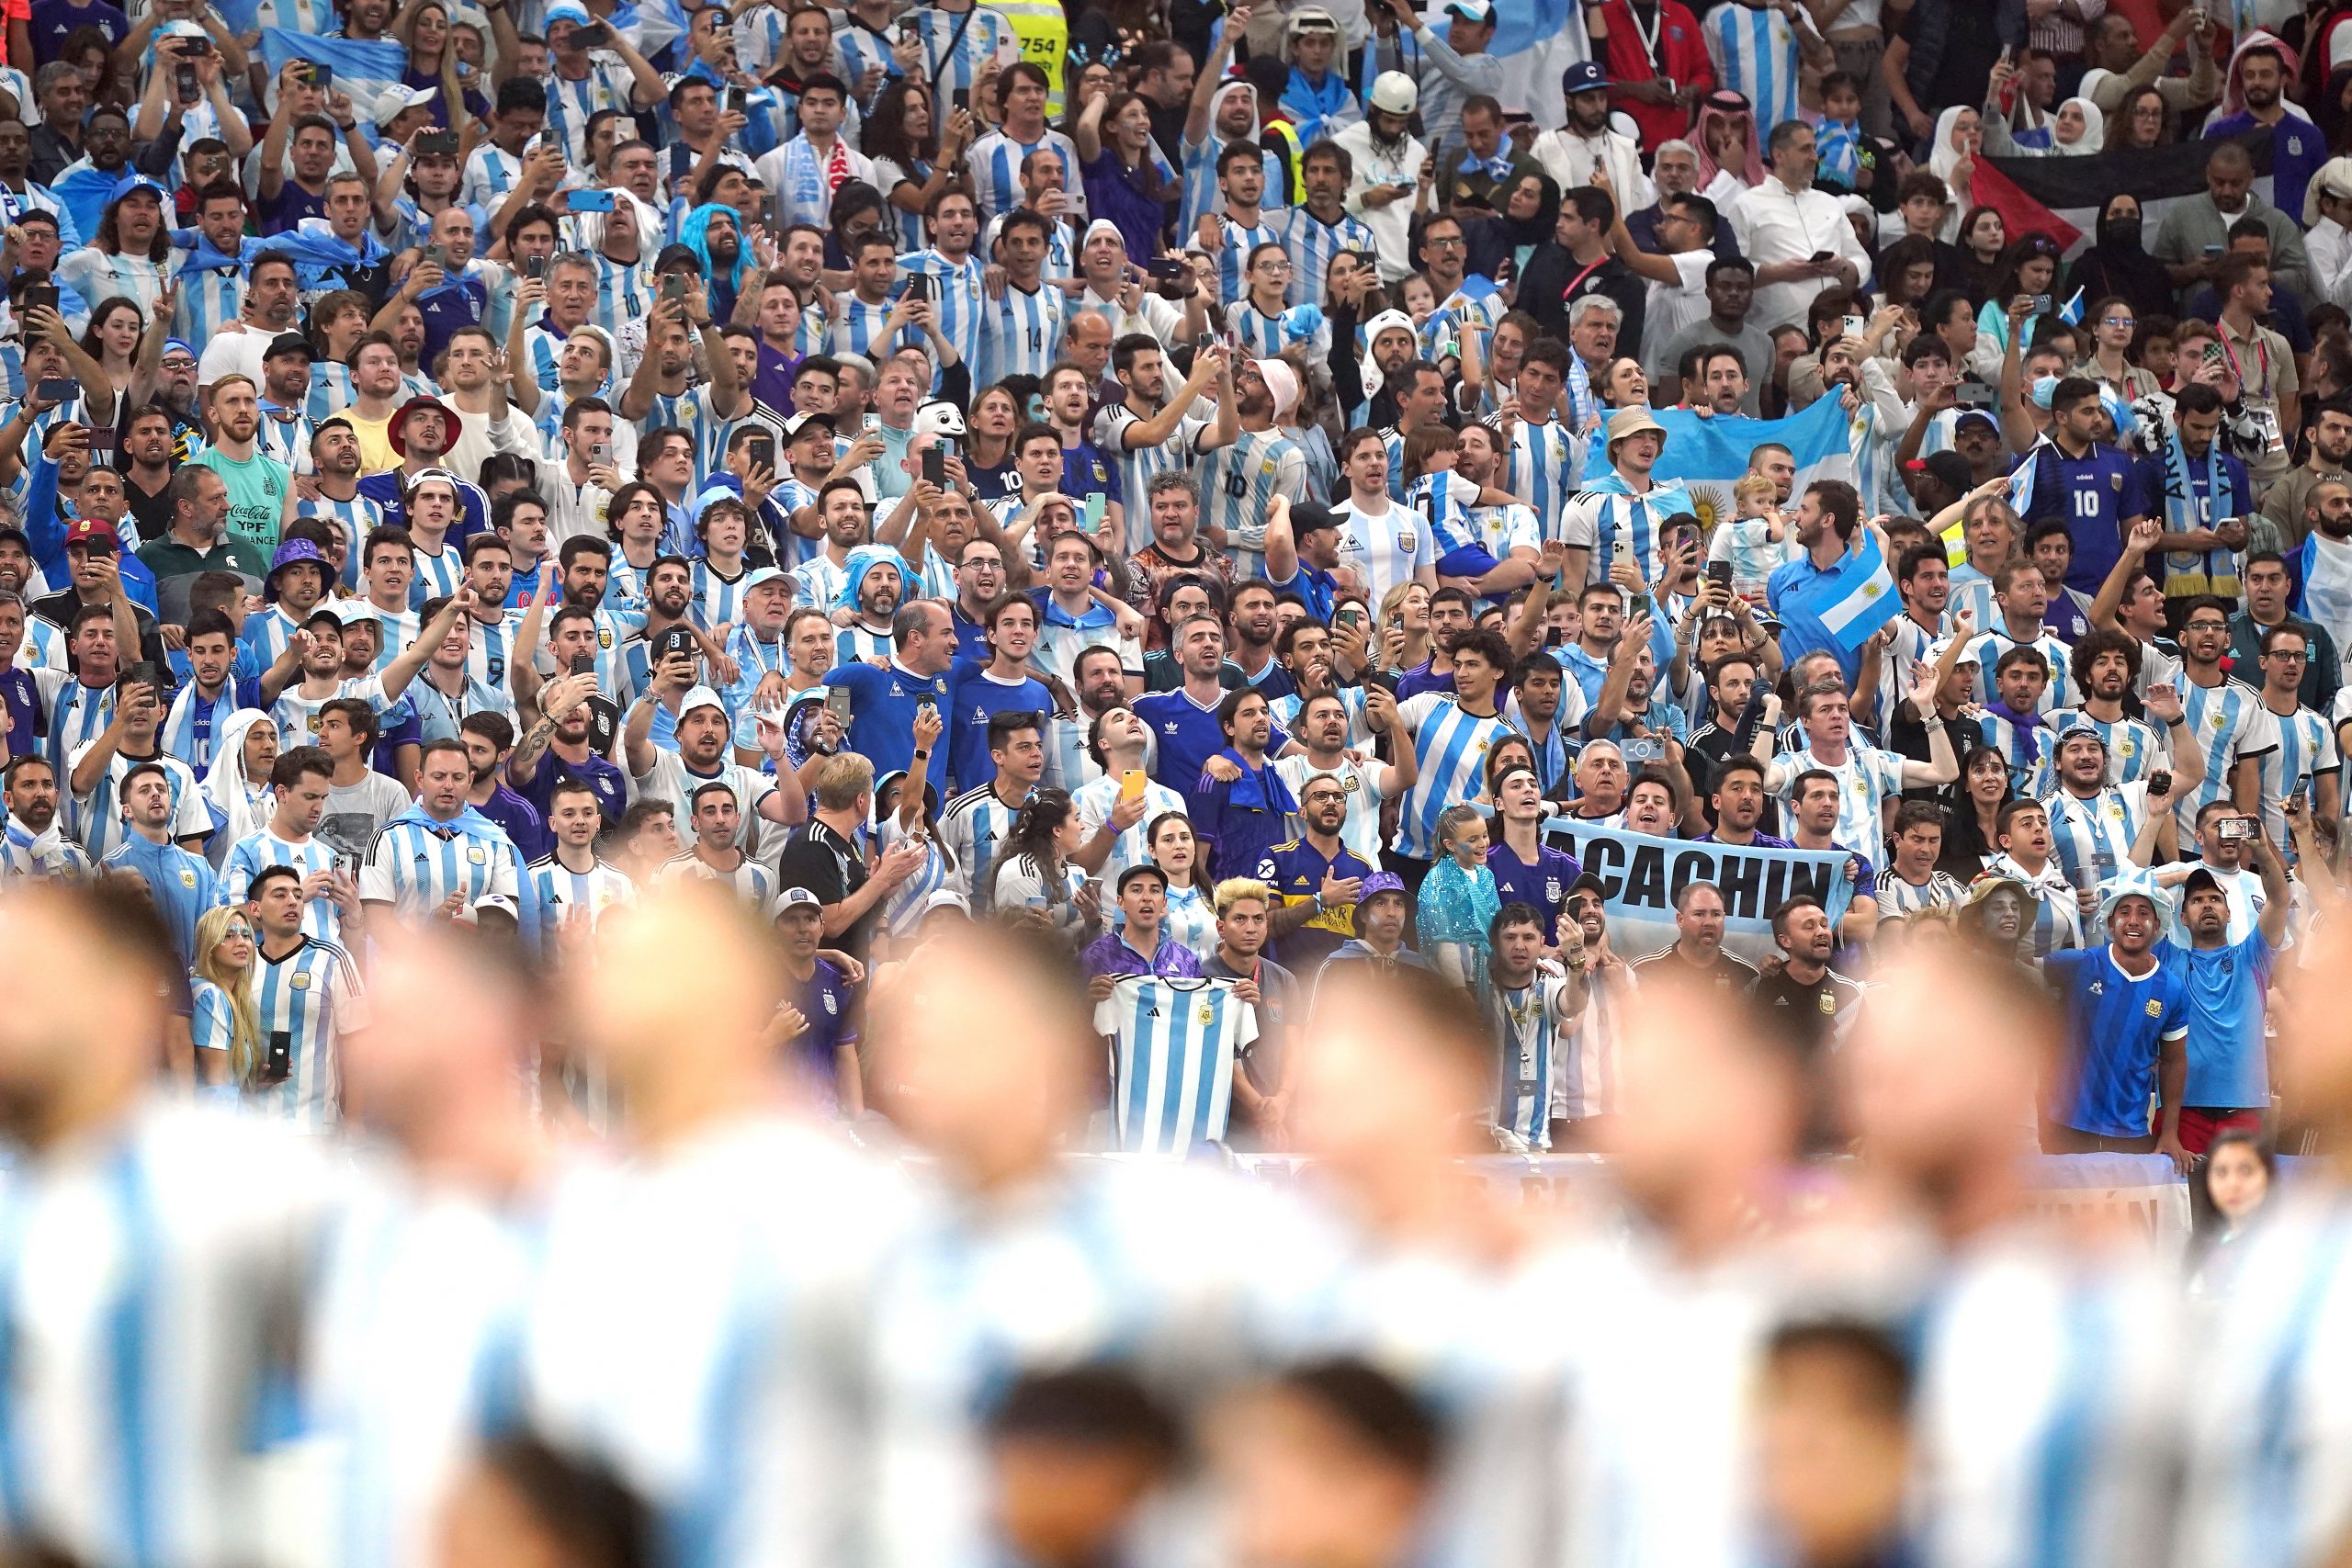 13 December 2022, Qatar, Lusail: Argentina fans cheer as players line up during the national anthem prior to the start of the FIFA World Cup Qatar 2022 semi final soccer match between Argentina and Croatia at the Lusail Stadium. Photo: Mike Egerton/PA Wire/dpa